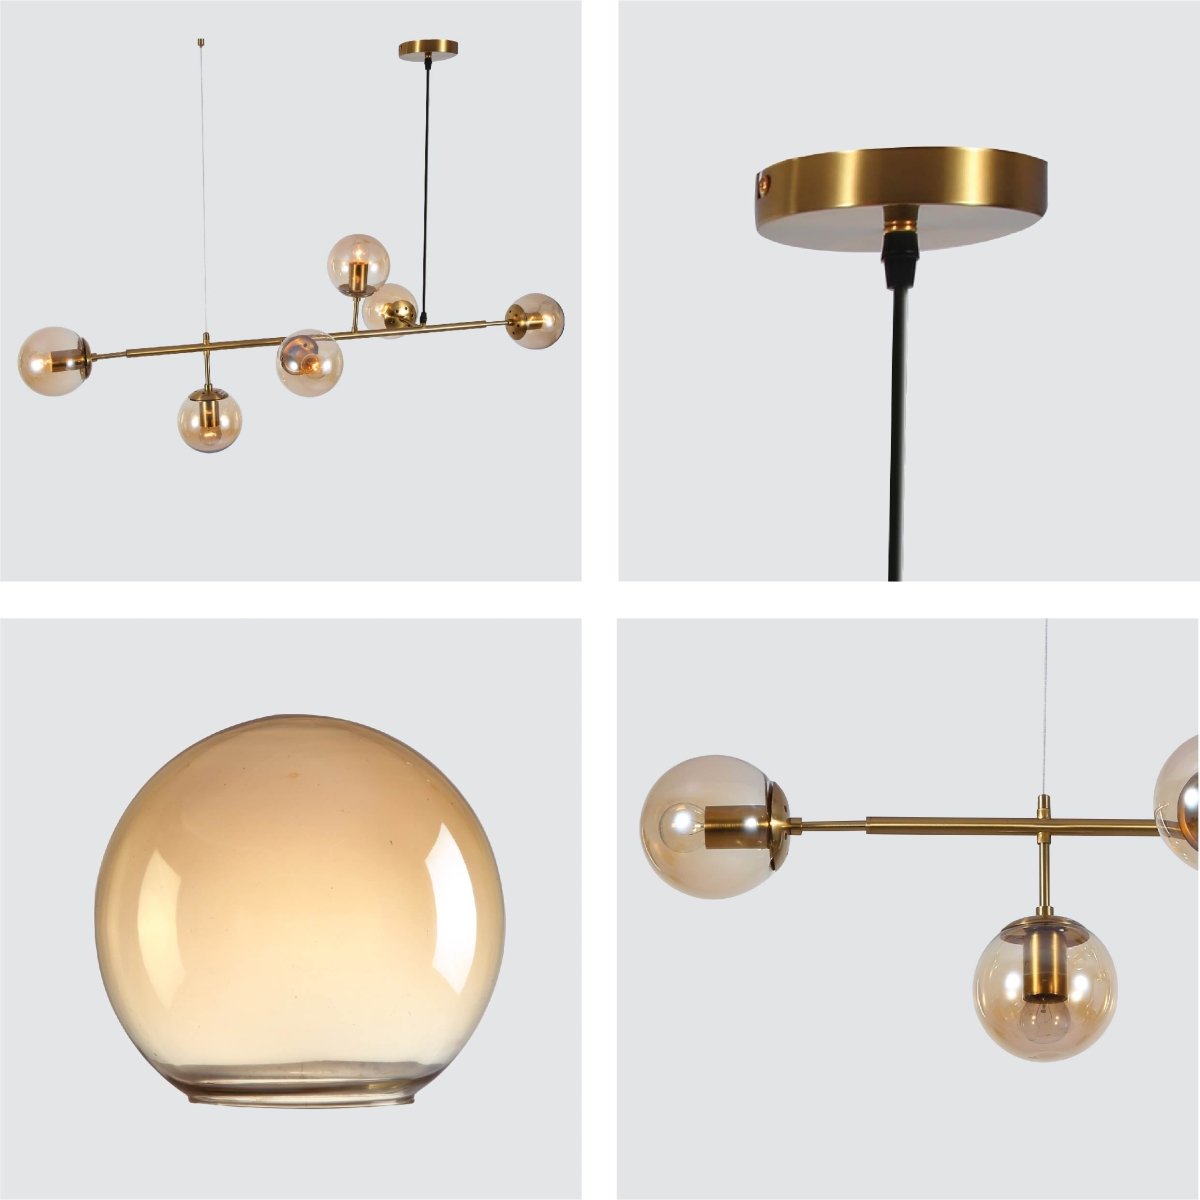 Detailed shots of Amber Globe Glass Gold Metal Island Chandelier Ceiling Light with 6xE27 Fitting | TEKLED 159-17462